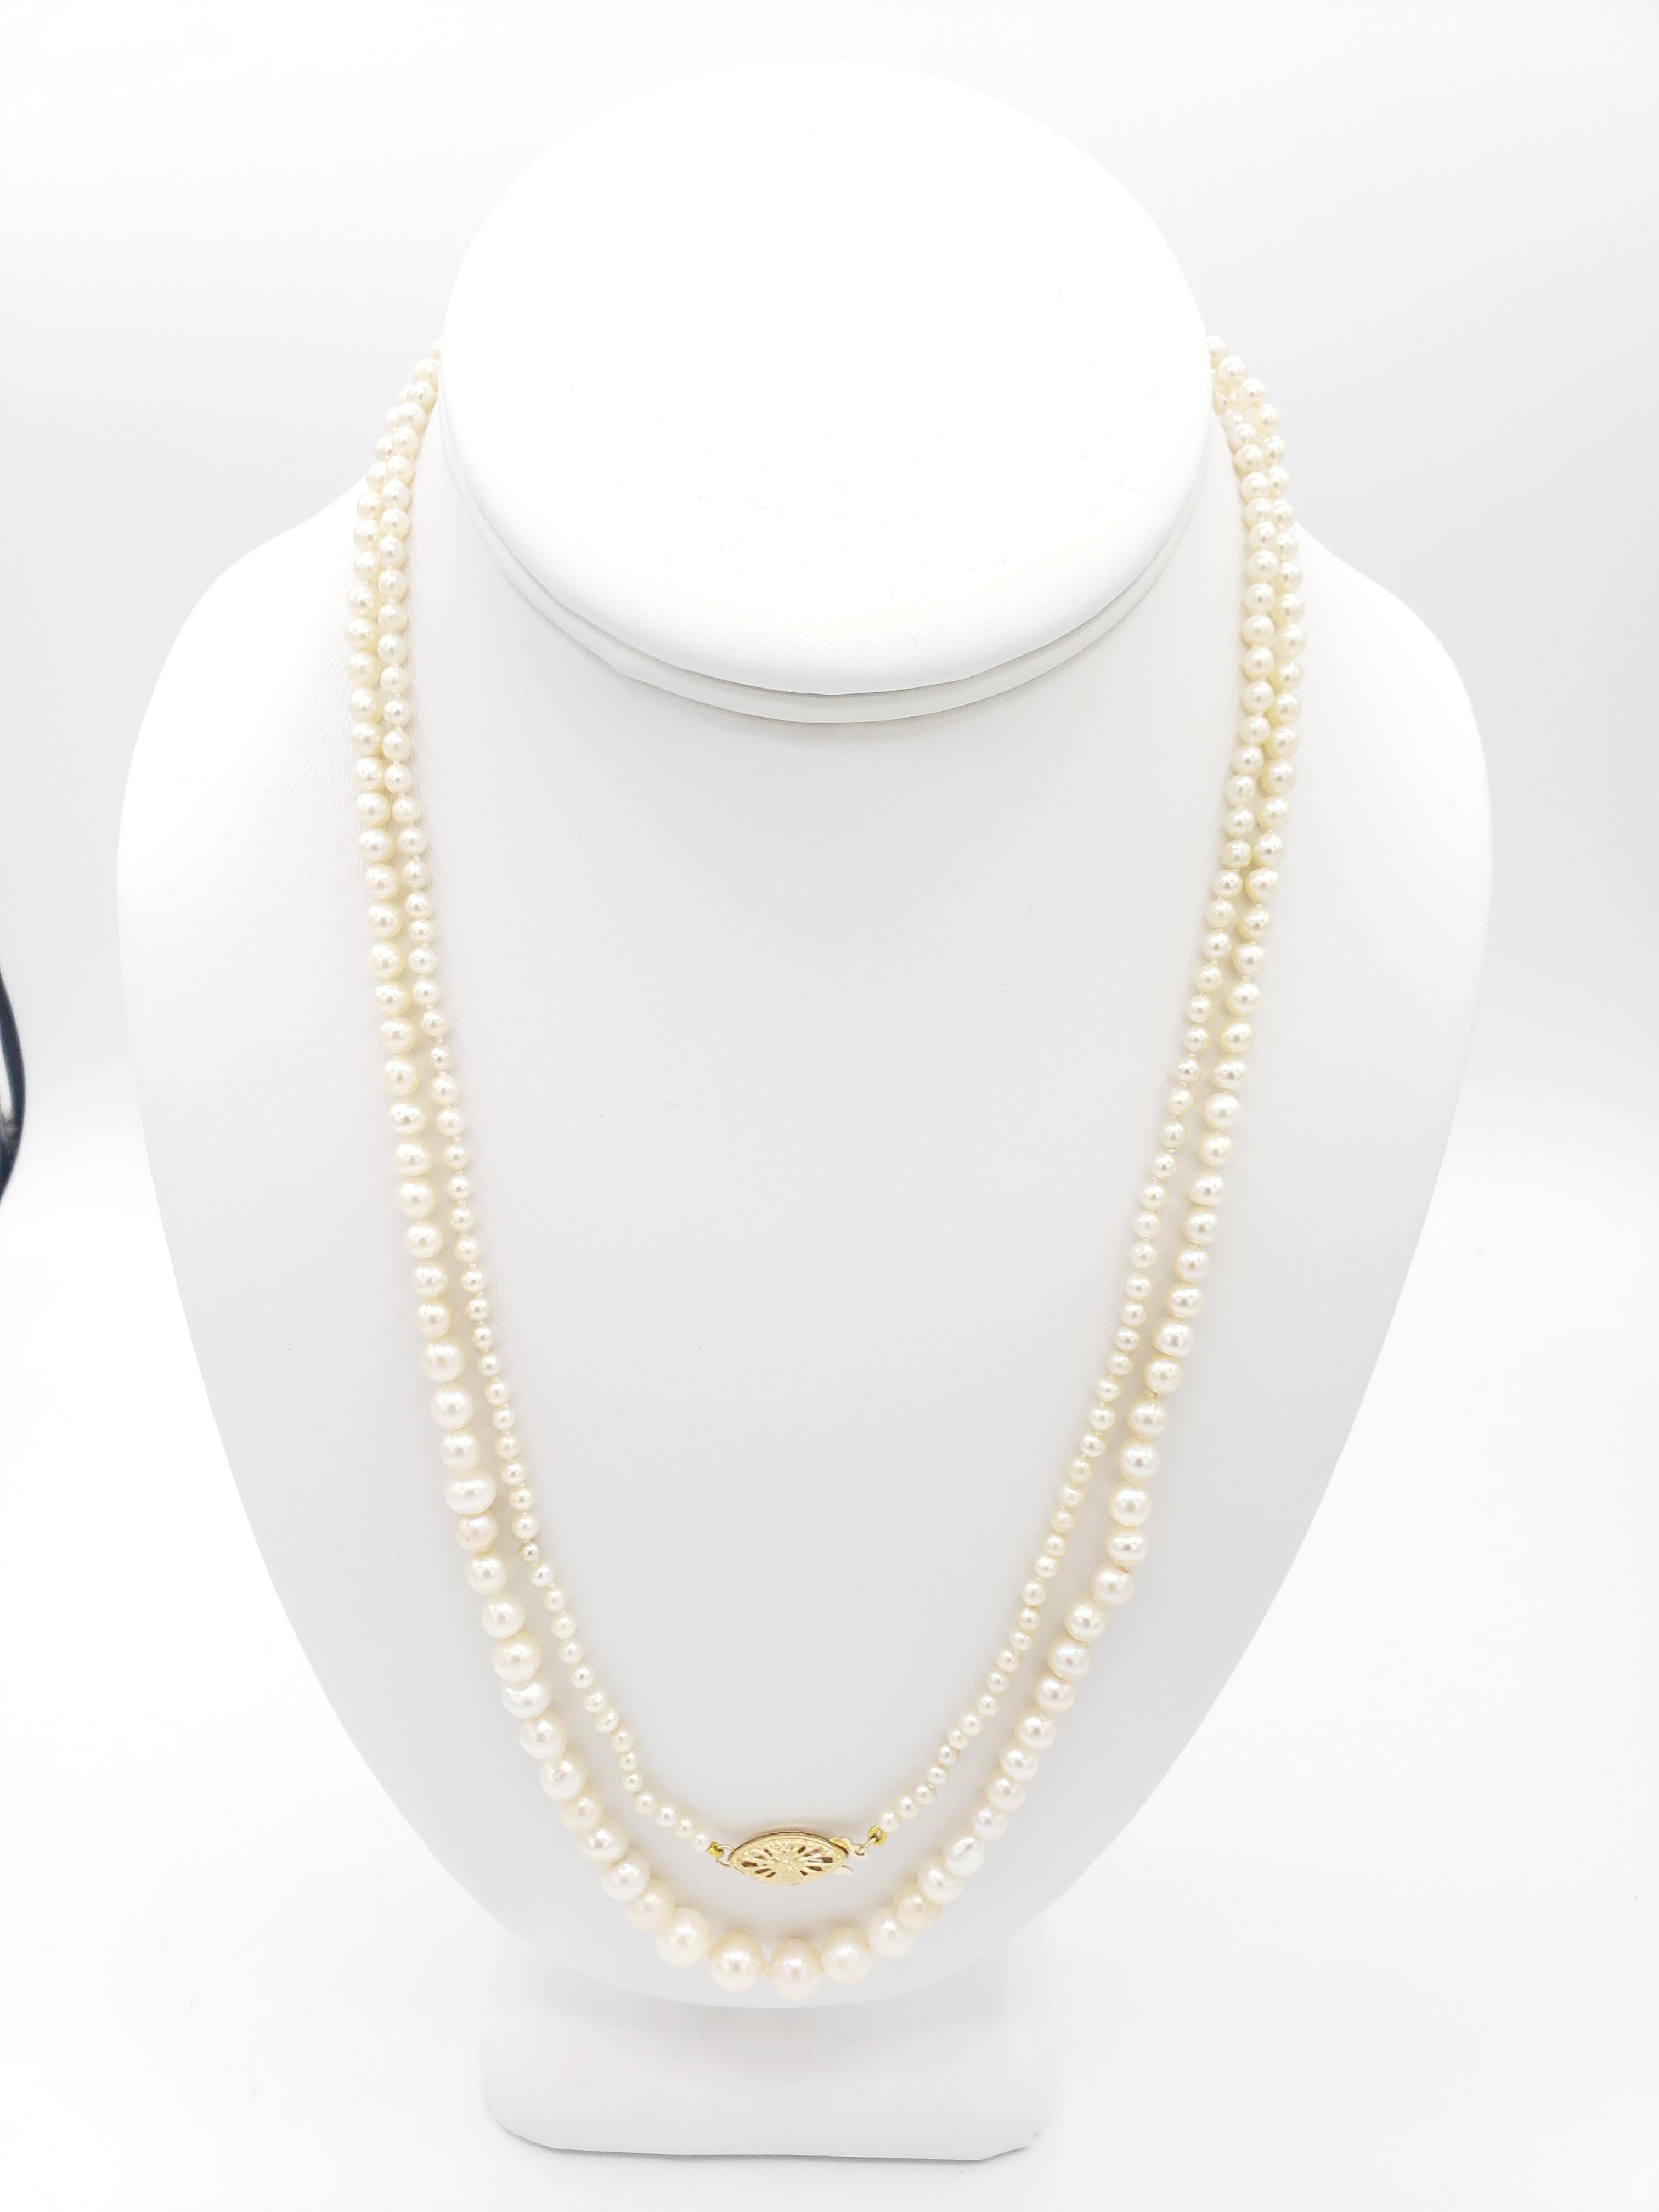 NEW GIA Cert Natural Saltwater Pearl Necklace 42 inches long.